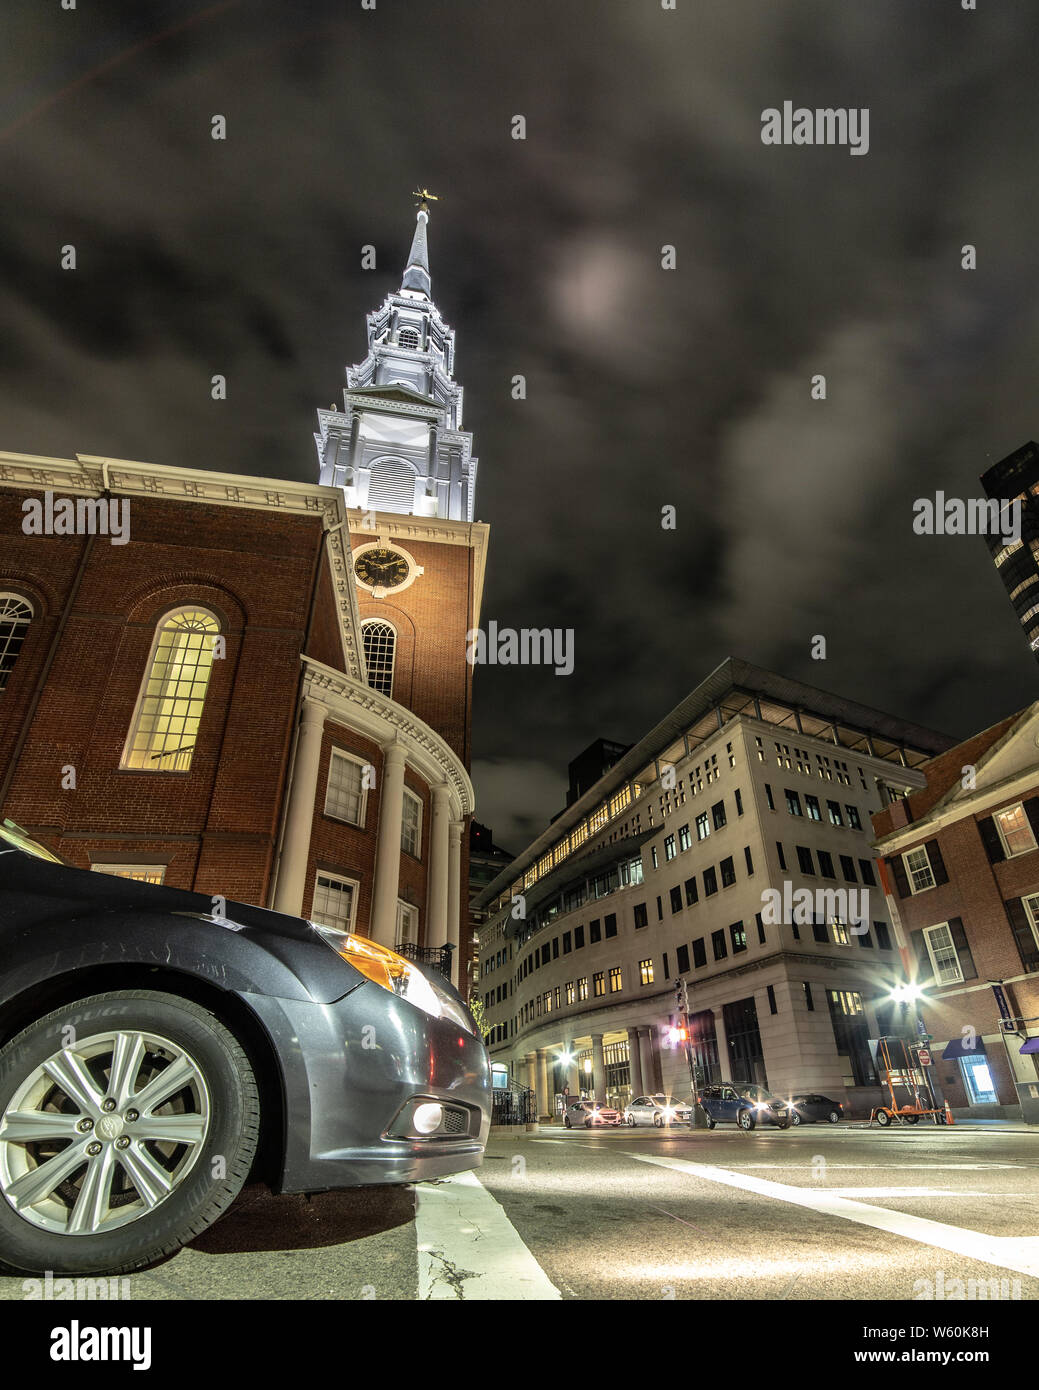 Vehicles stopped at intersection in City at night. Stock Photo